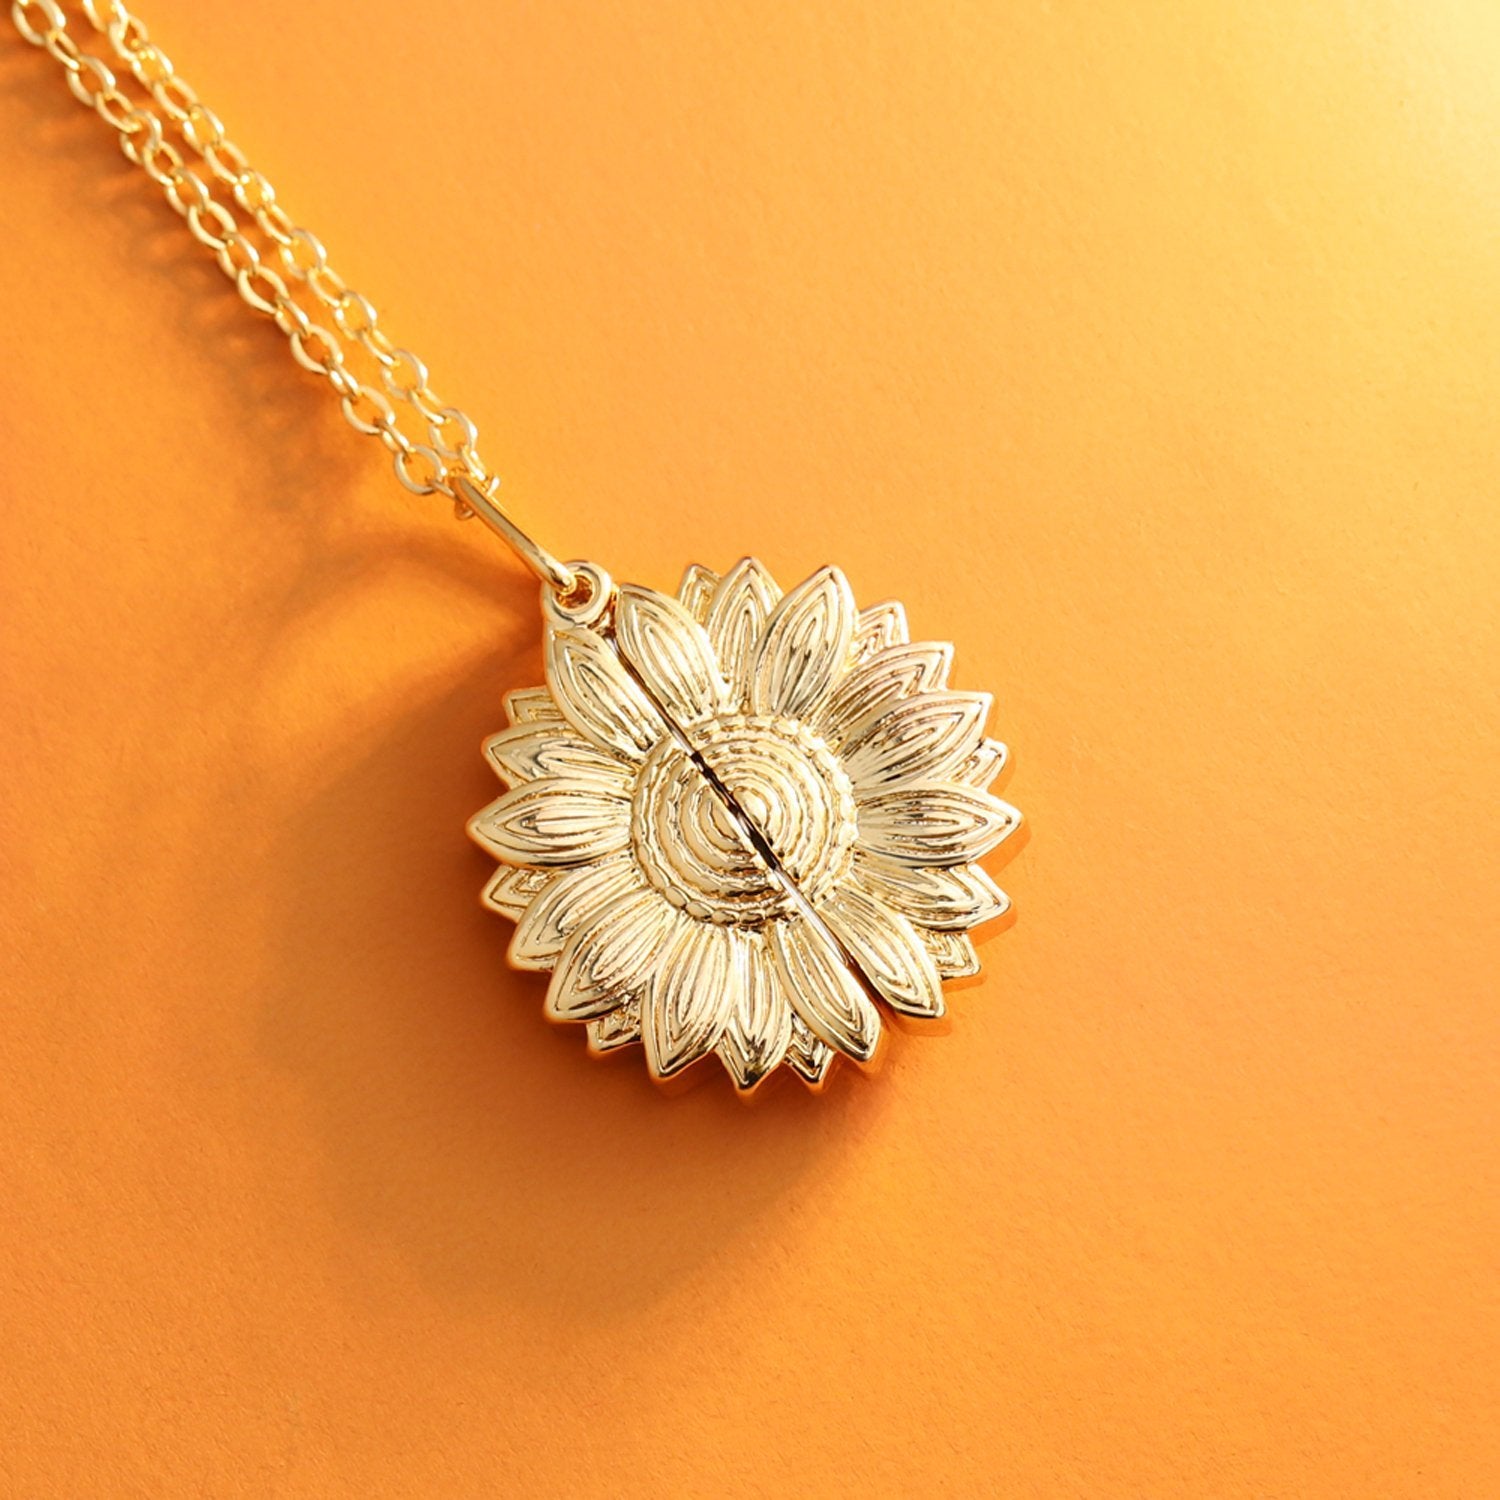 "YOU ARE MY SUNSHINE", Sunflower Necklace for Mother